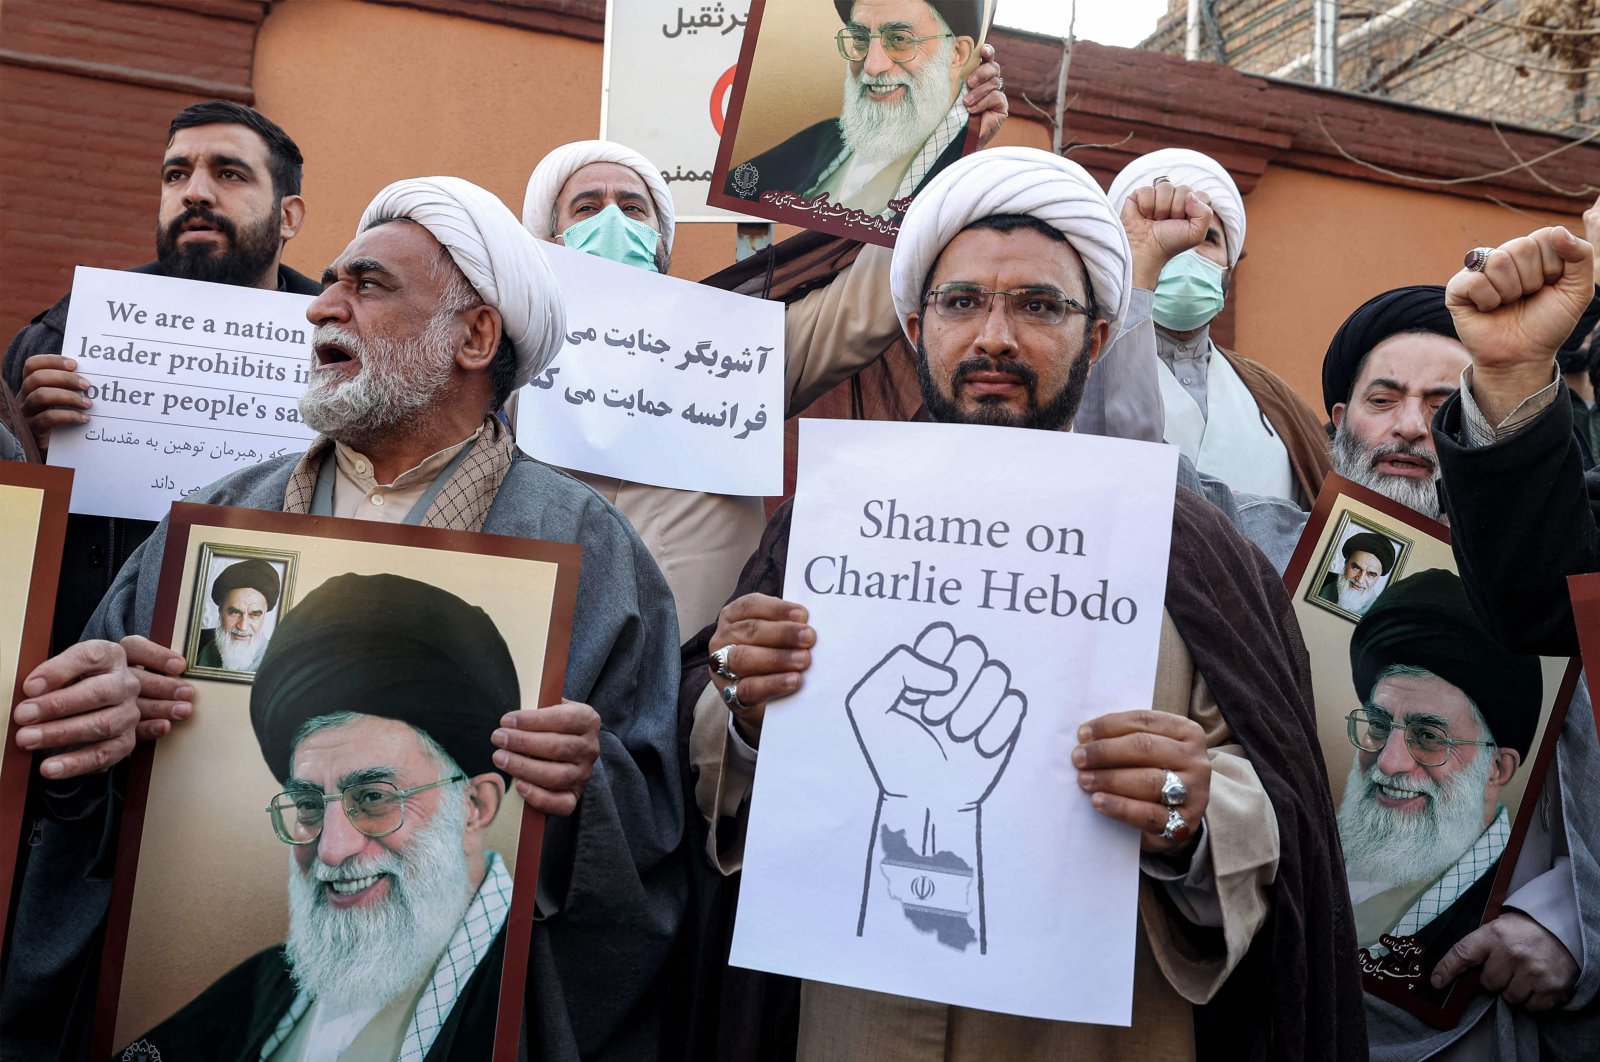 Demonstrators gather with images of Iran&#039;s supreme leader Ayatollah Ali Khamenei during a protest against defamatory cartoons depicting him published by French satirical weekly Charlie Hebdo, outside the French embassy in Tehran, Iran, Jan. 8, 2023. (AFP Photo)